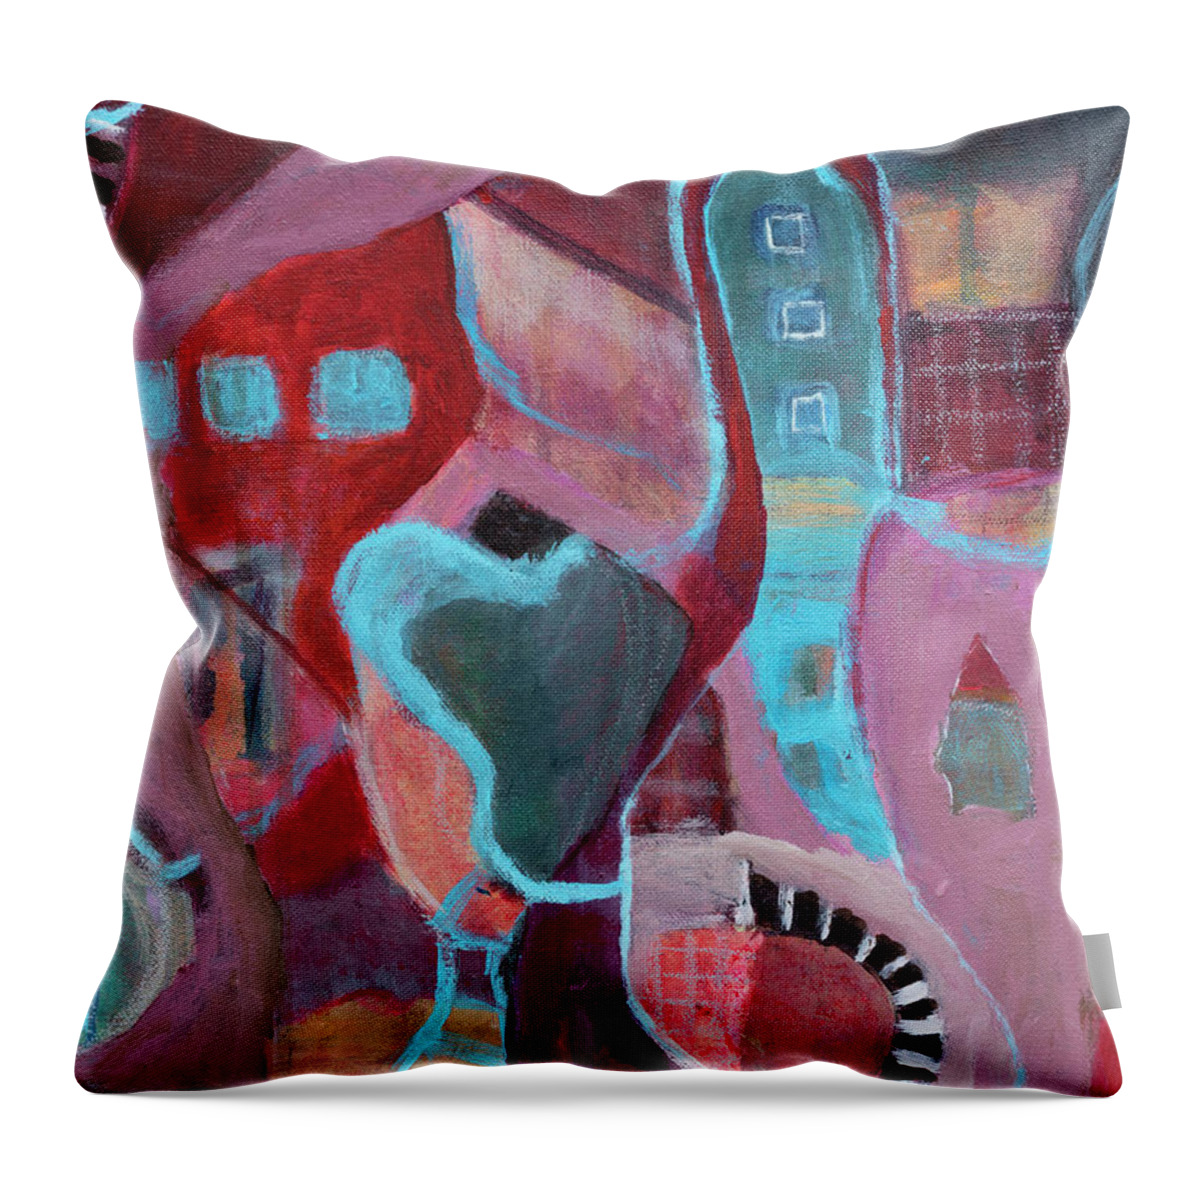 Painting Throw Pillow featuring the painting Holiday Windows by Susan Stone